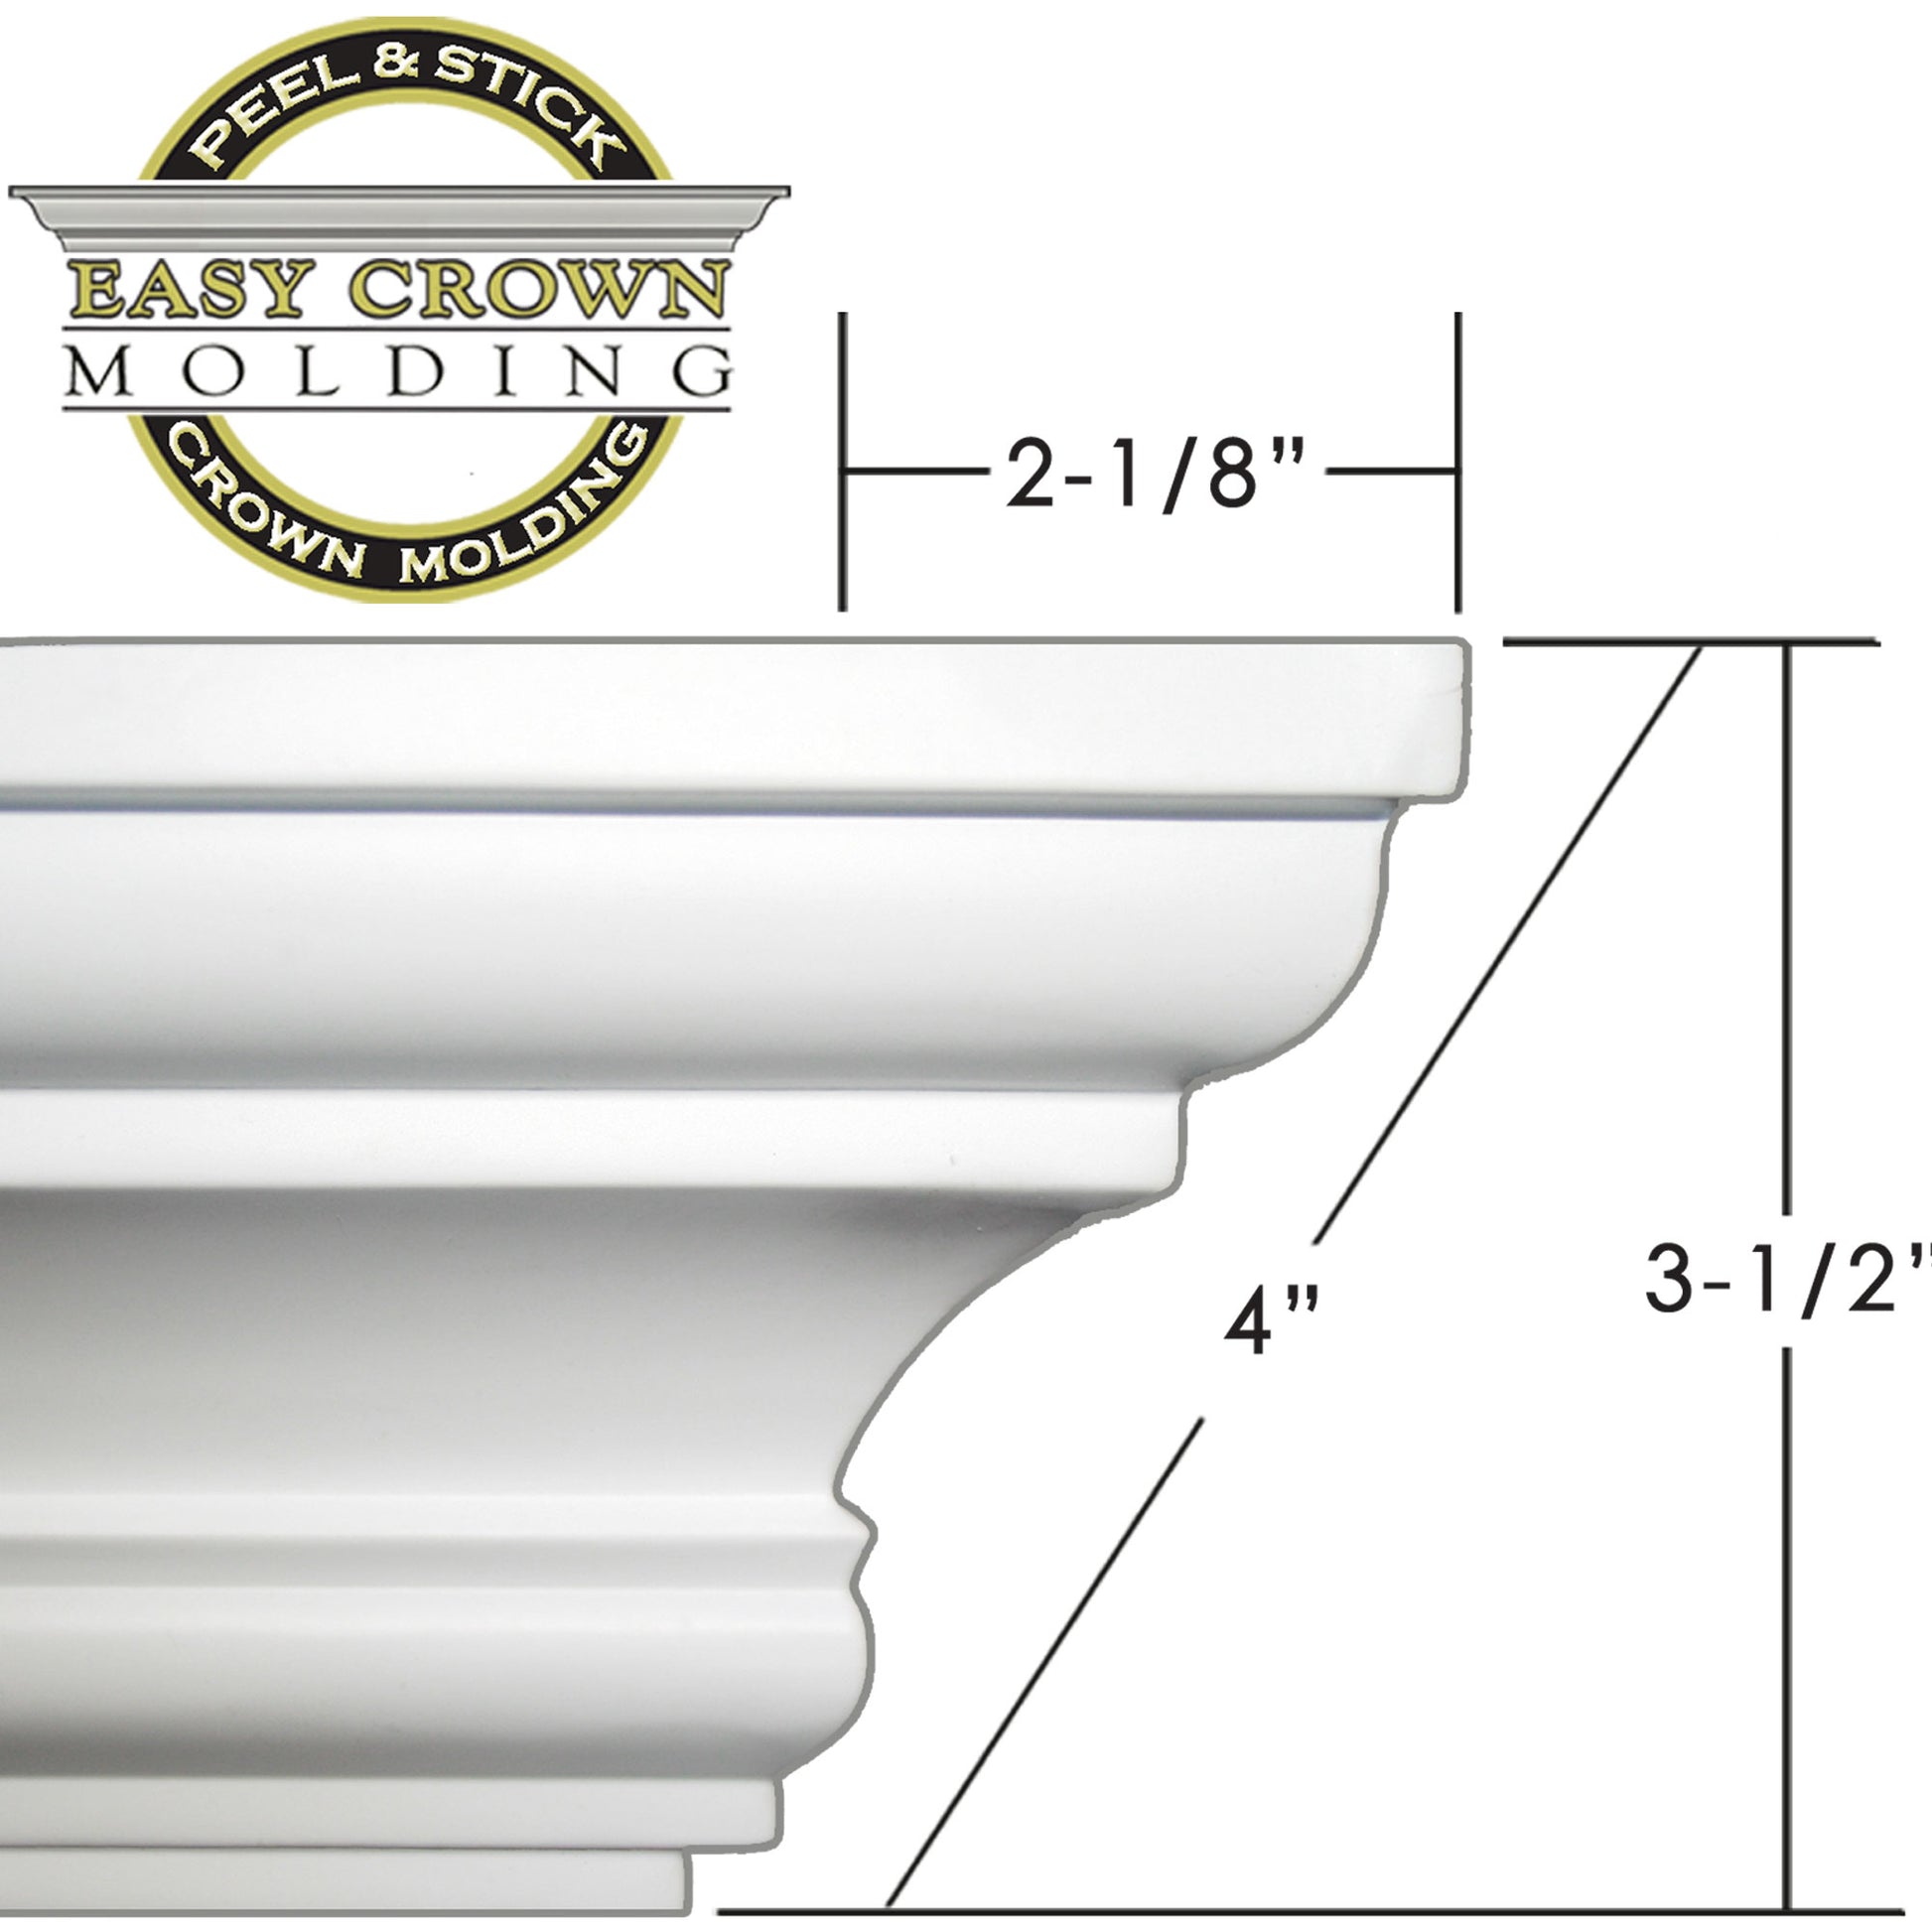 Easy Crown Molding 4" crown molding dimensions